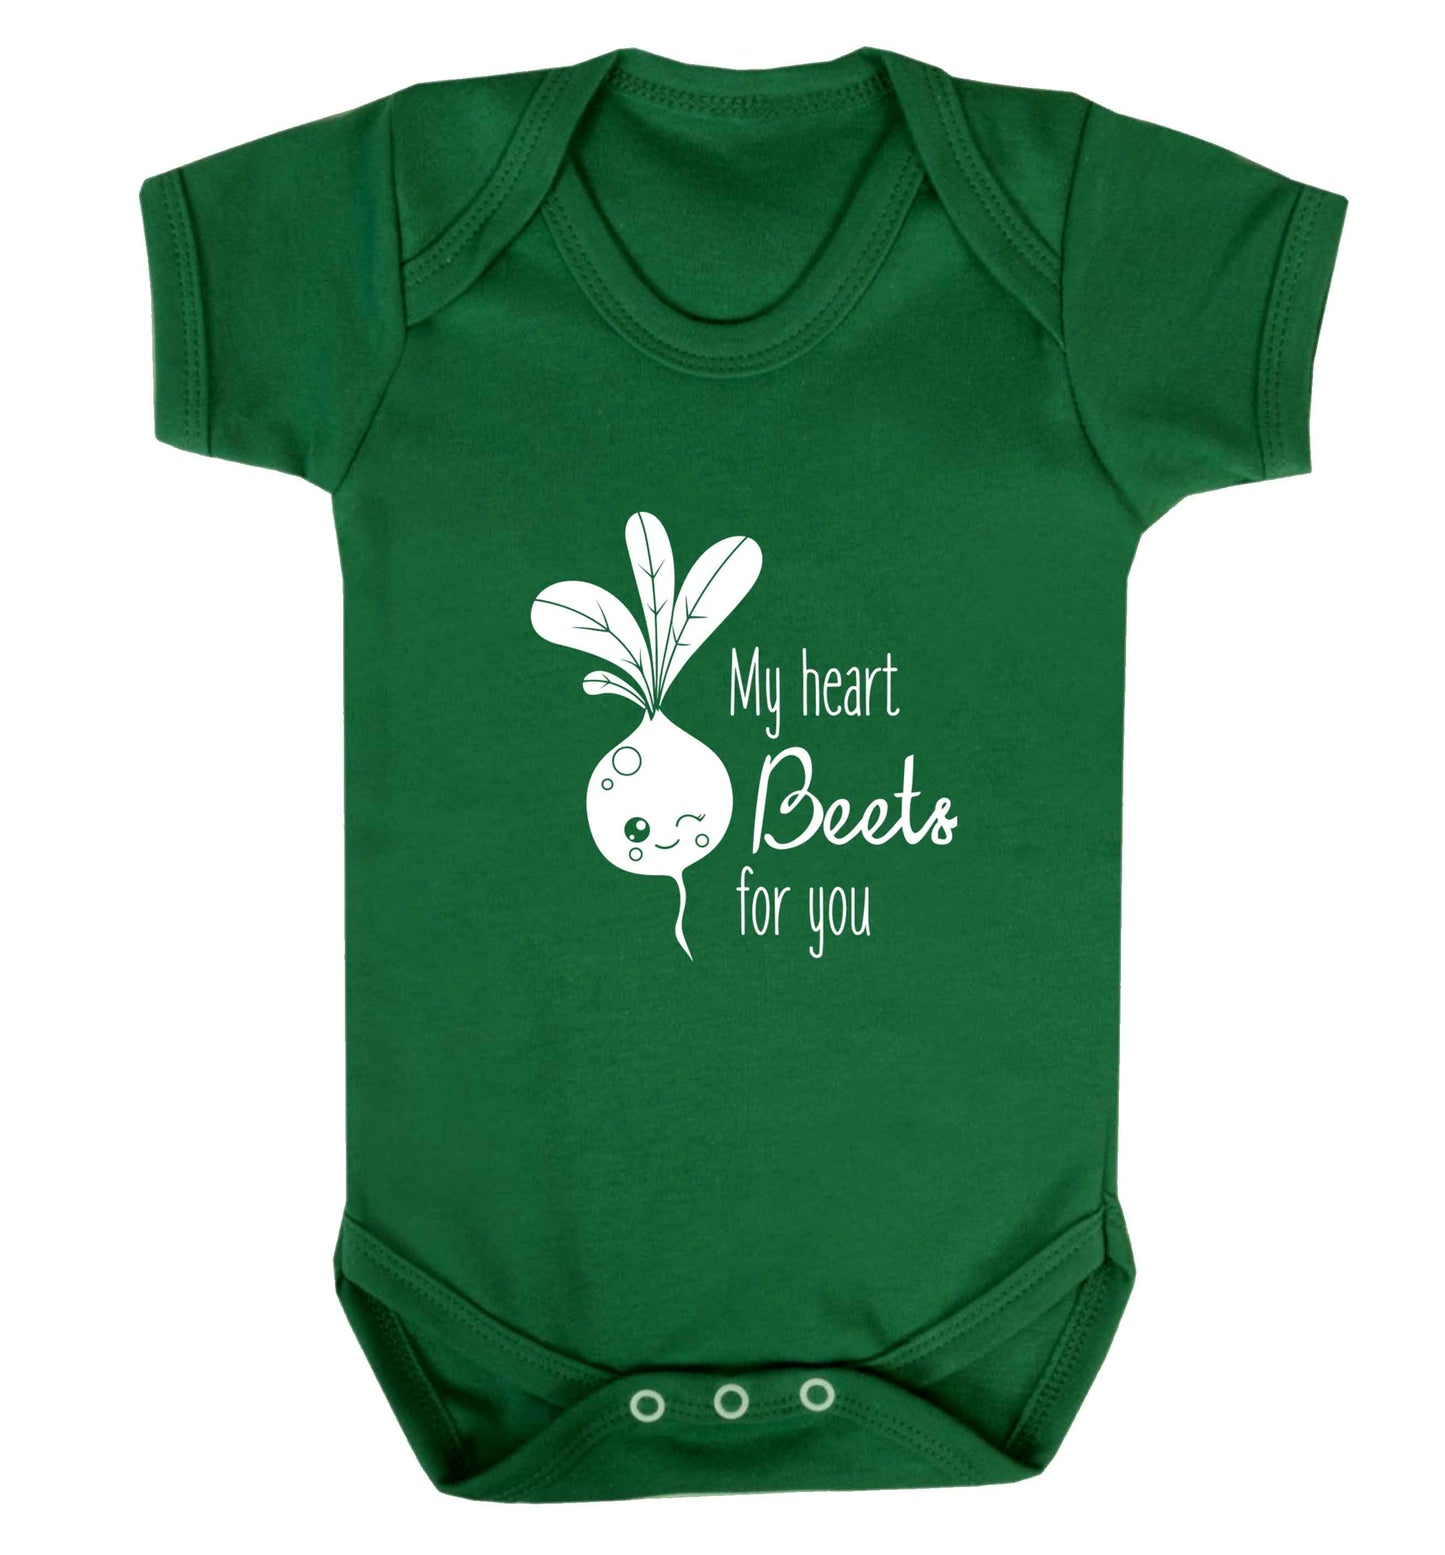 My heart beets for you baby vest green 18-24 months